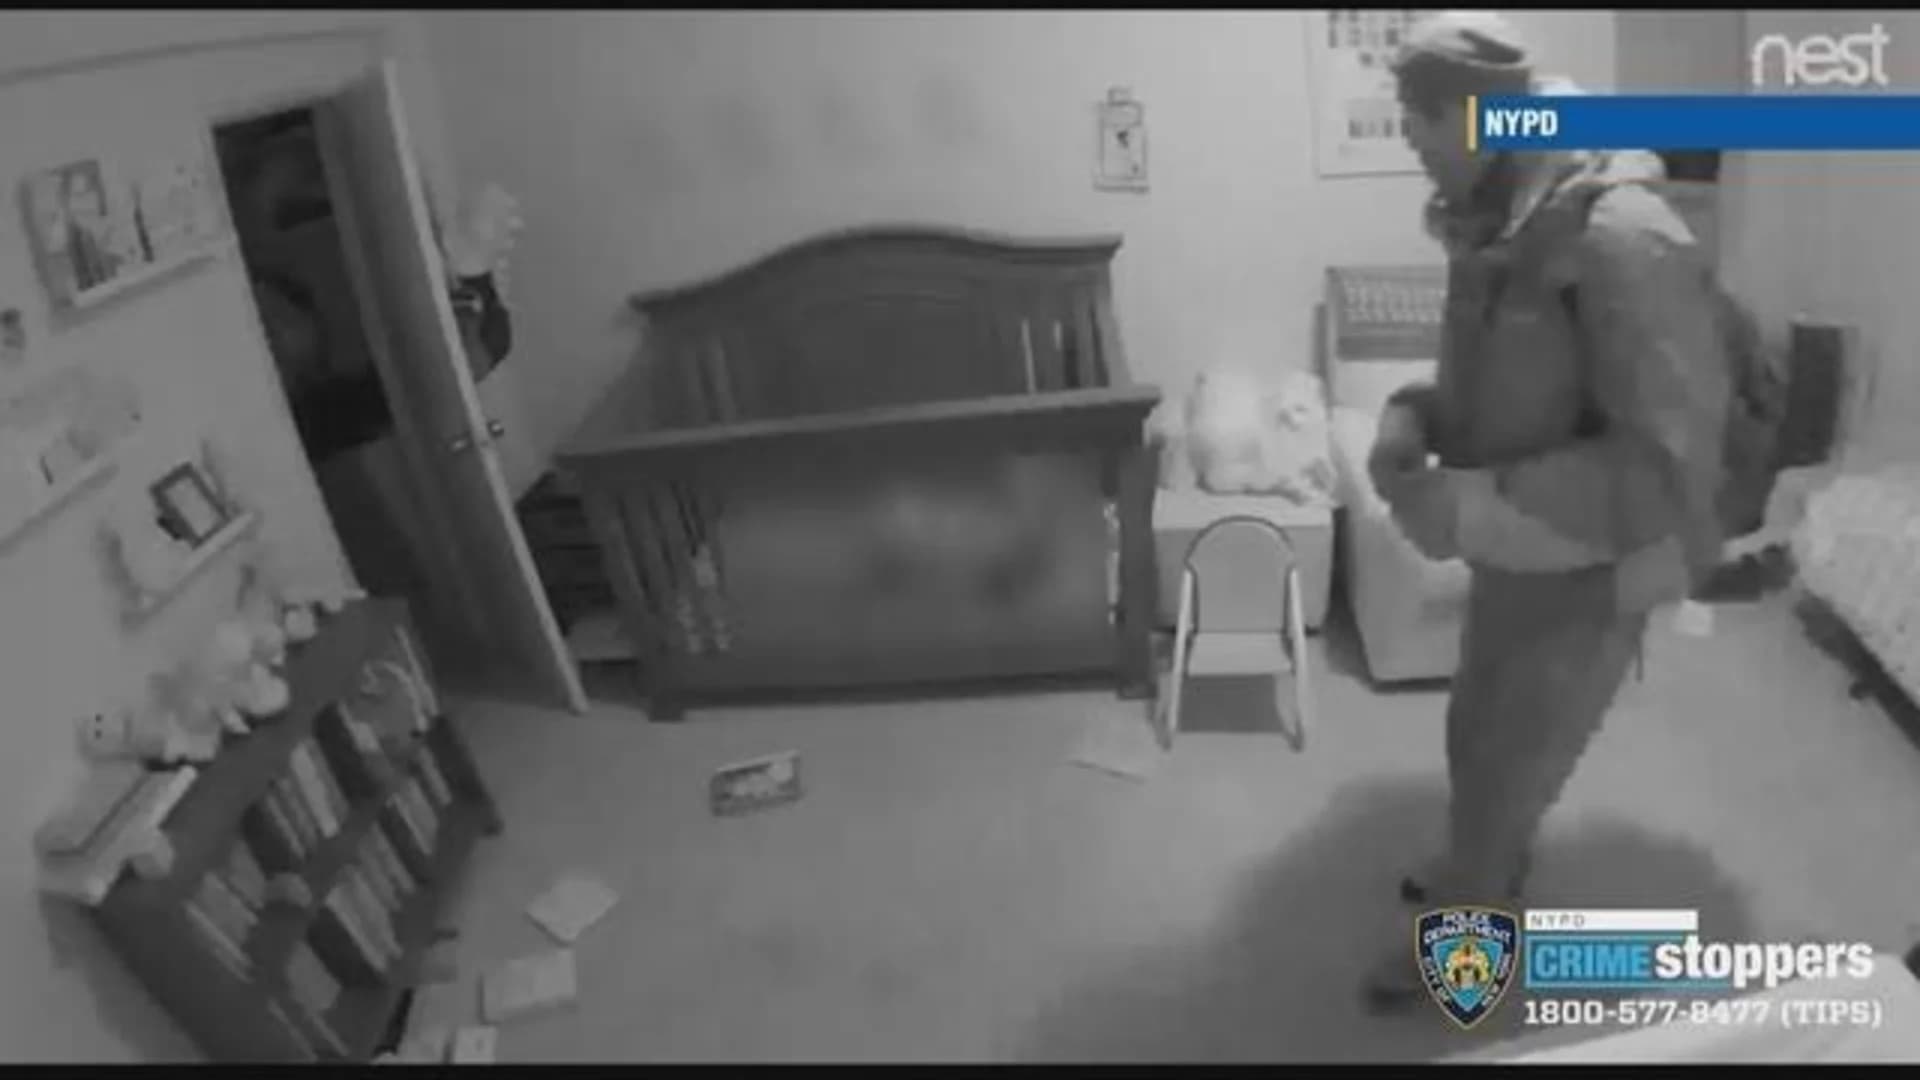 Caught on camera: Burglar enters room with sleeping 2-month-old